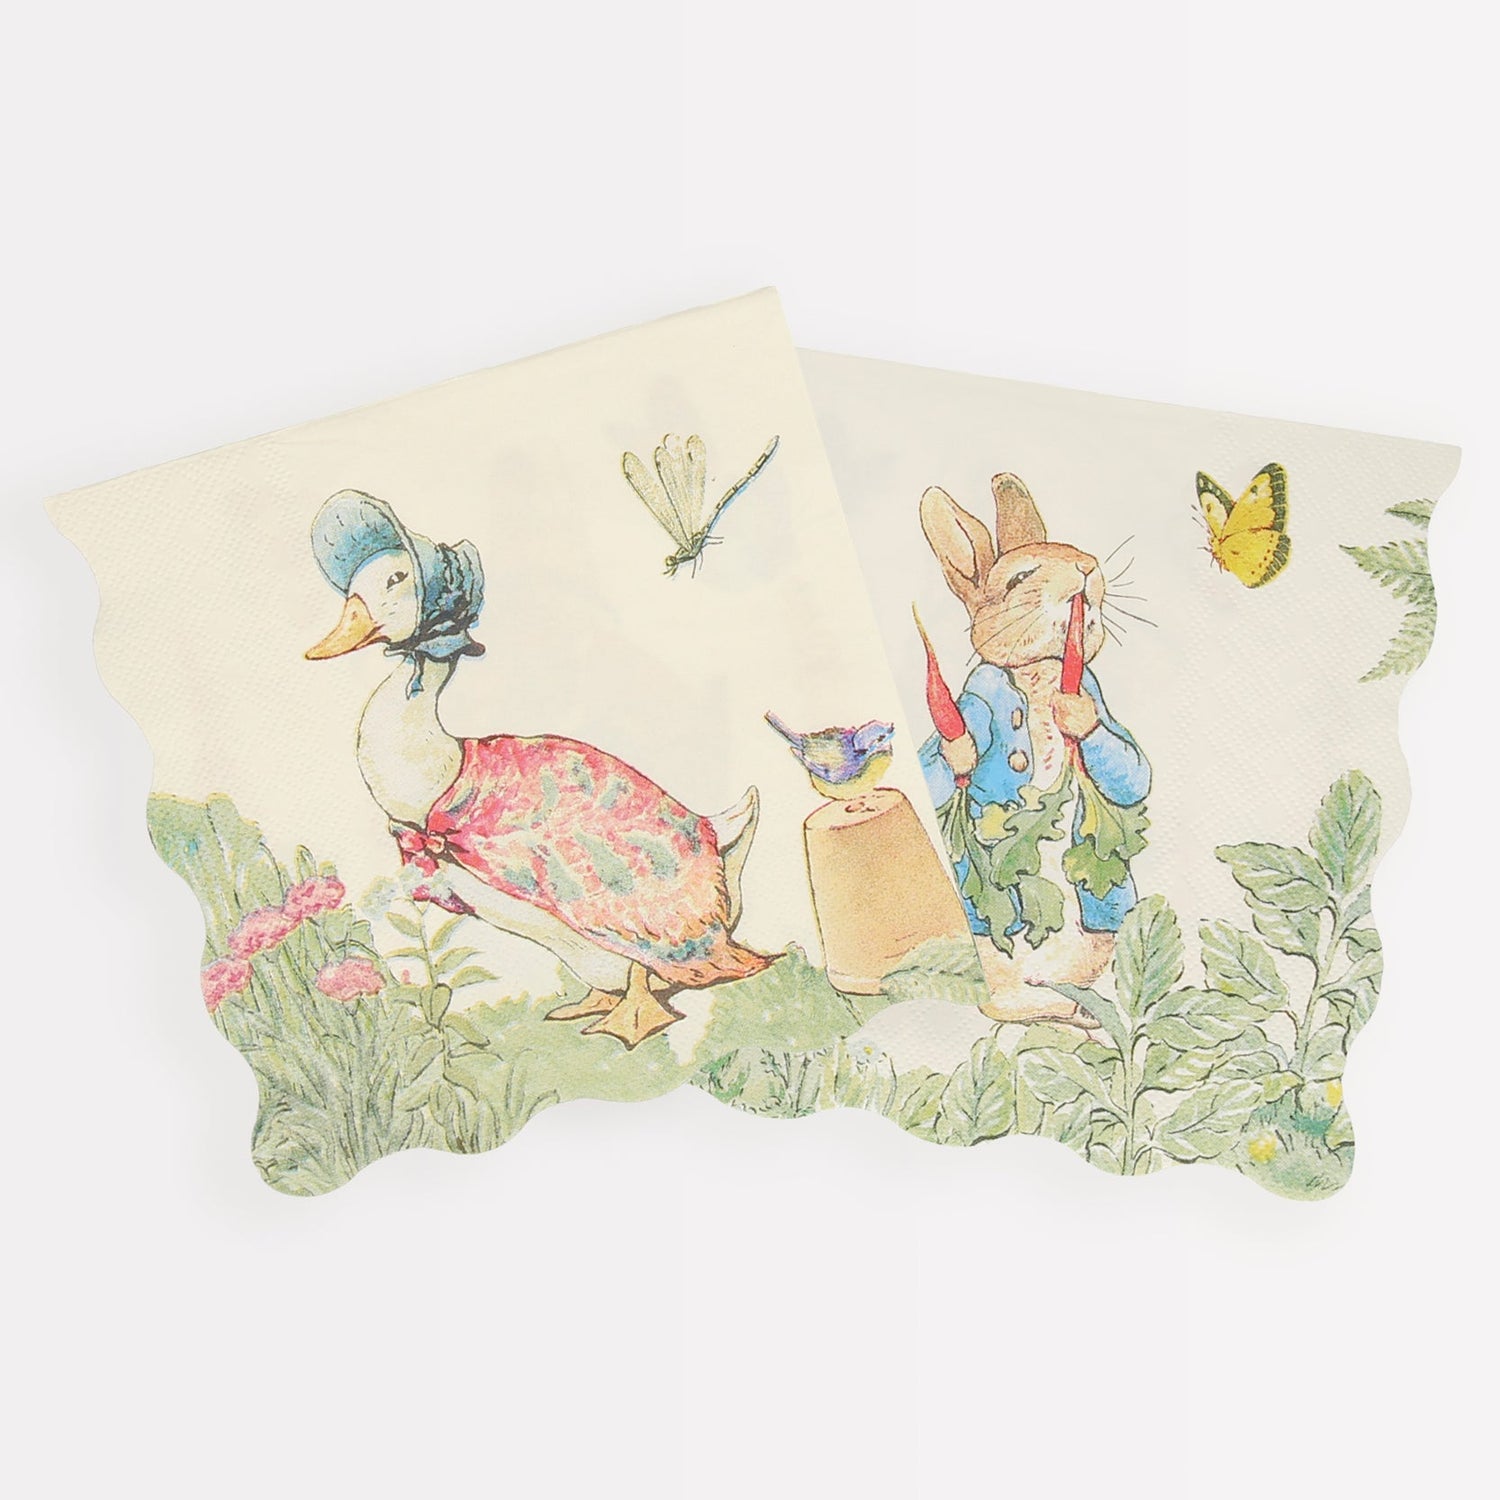 Set of 2 Peter Rabbit in The Garden napkins for party table by Meri Meri.